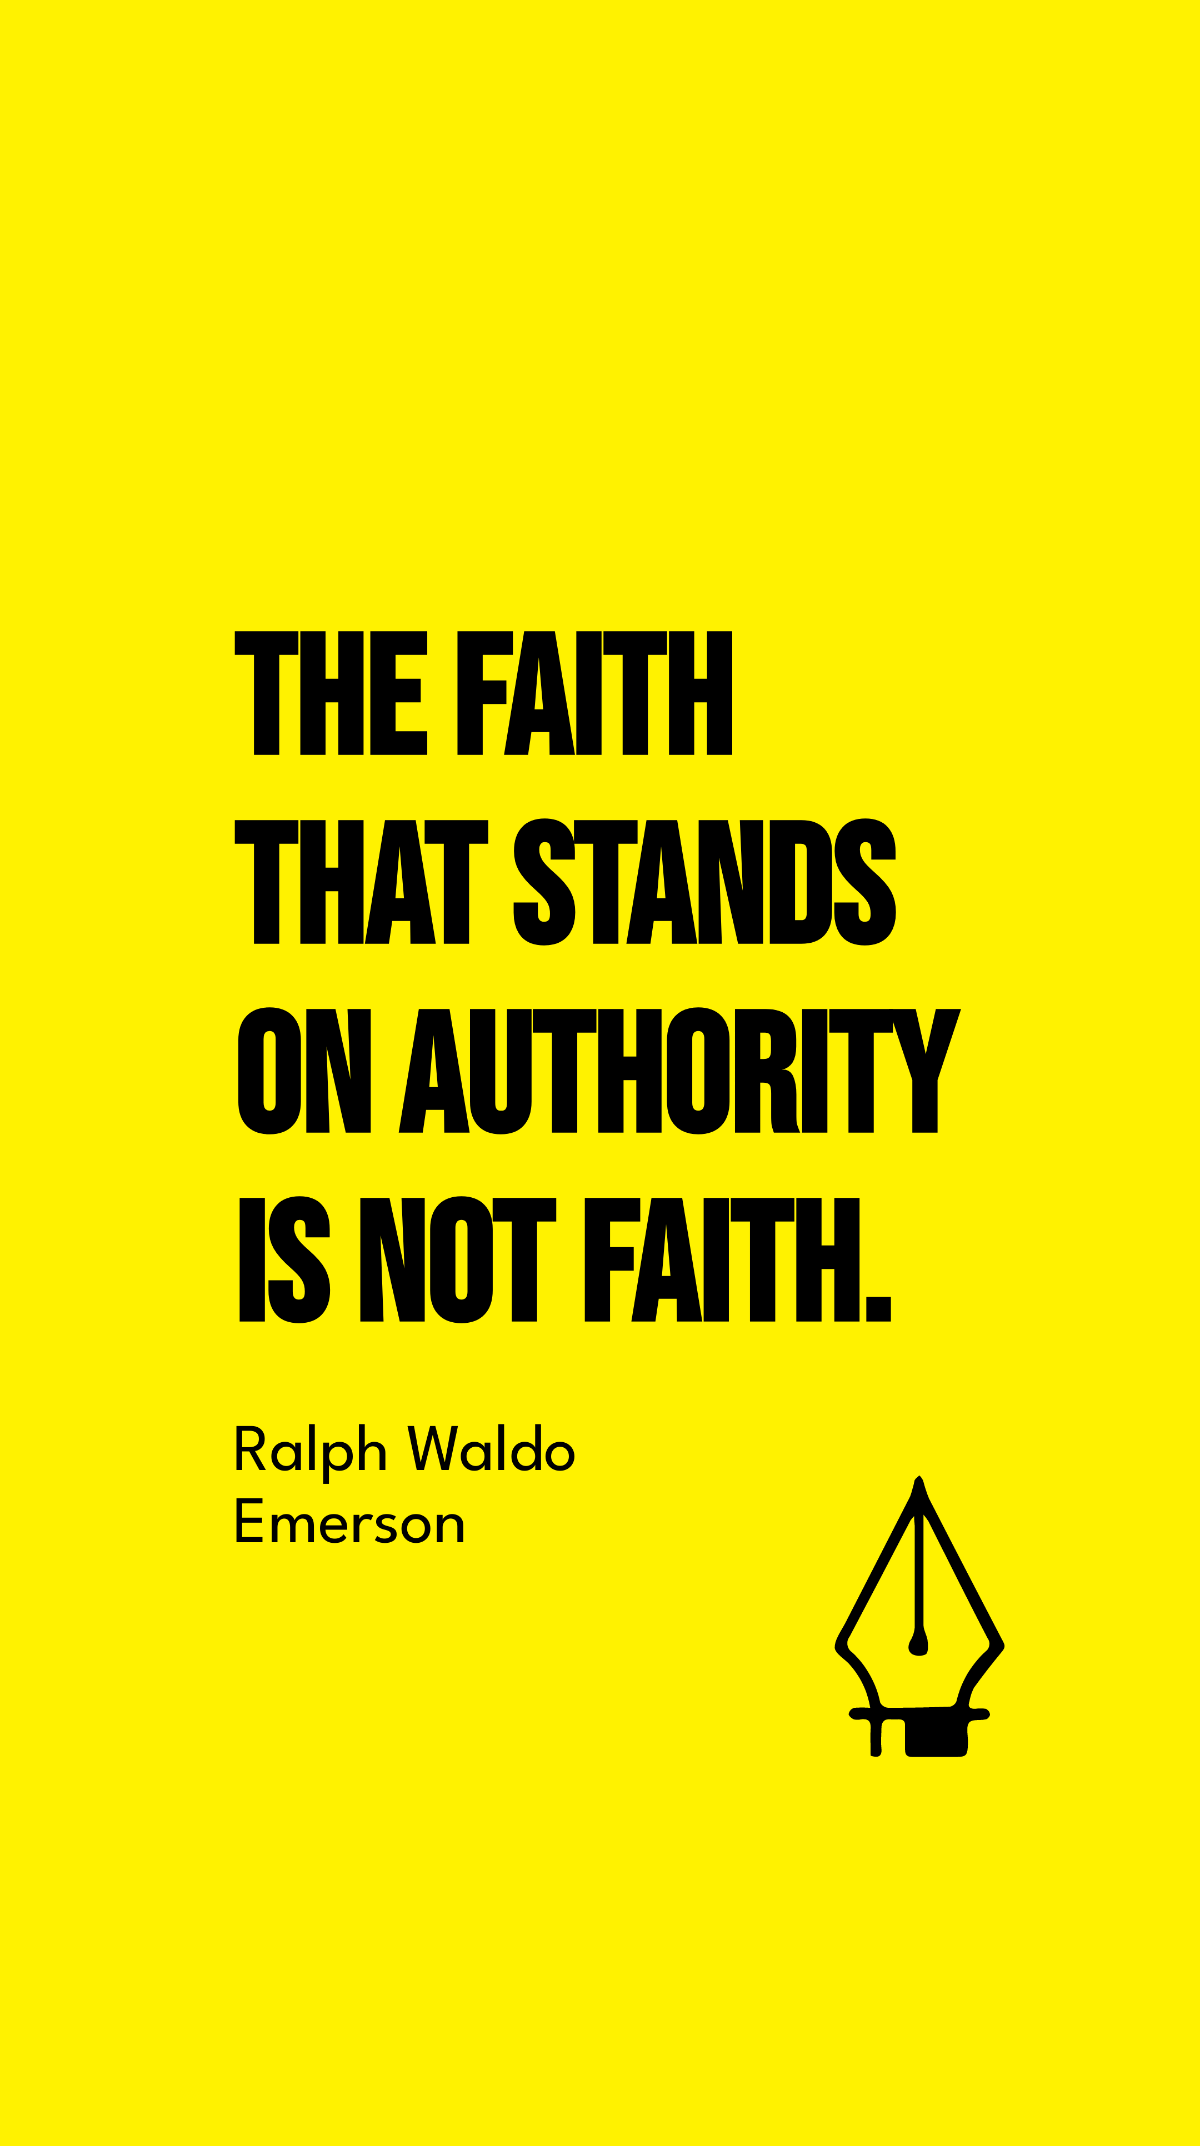 Ralph Waldo Emerson - The faith that stands on authority is not faith. Template